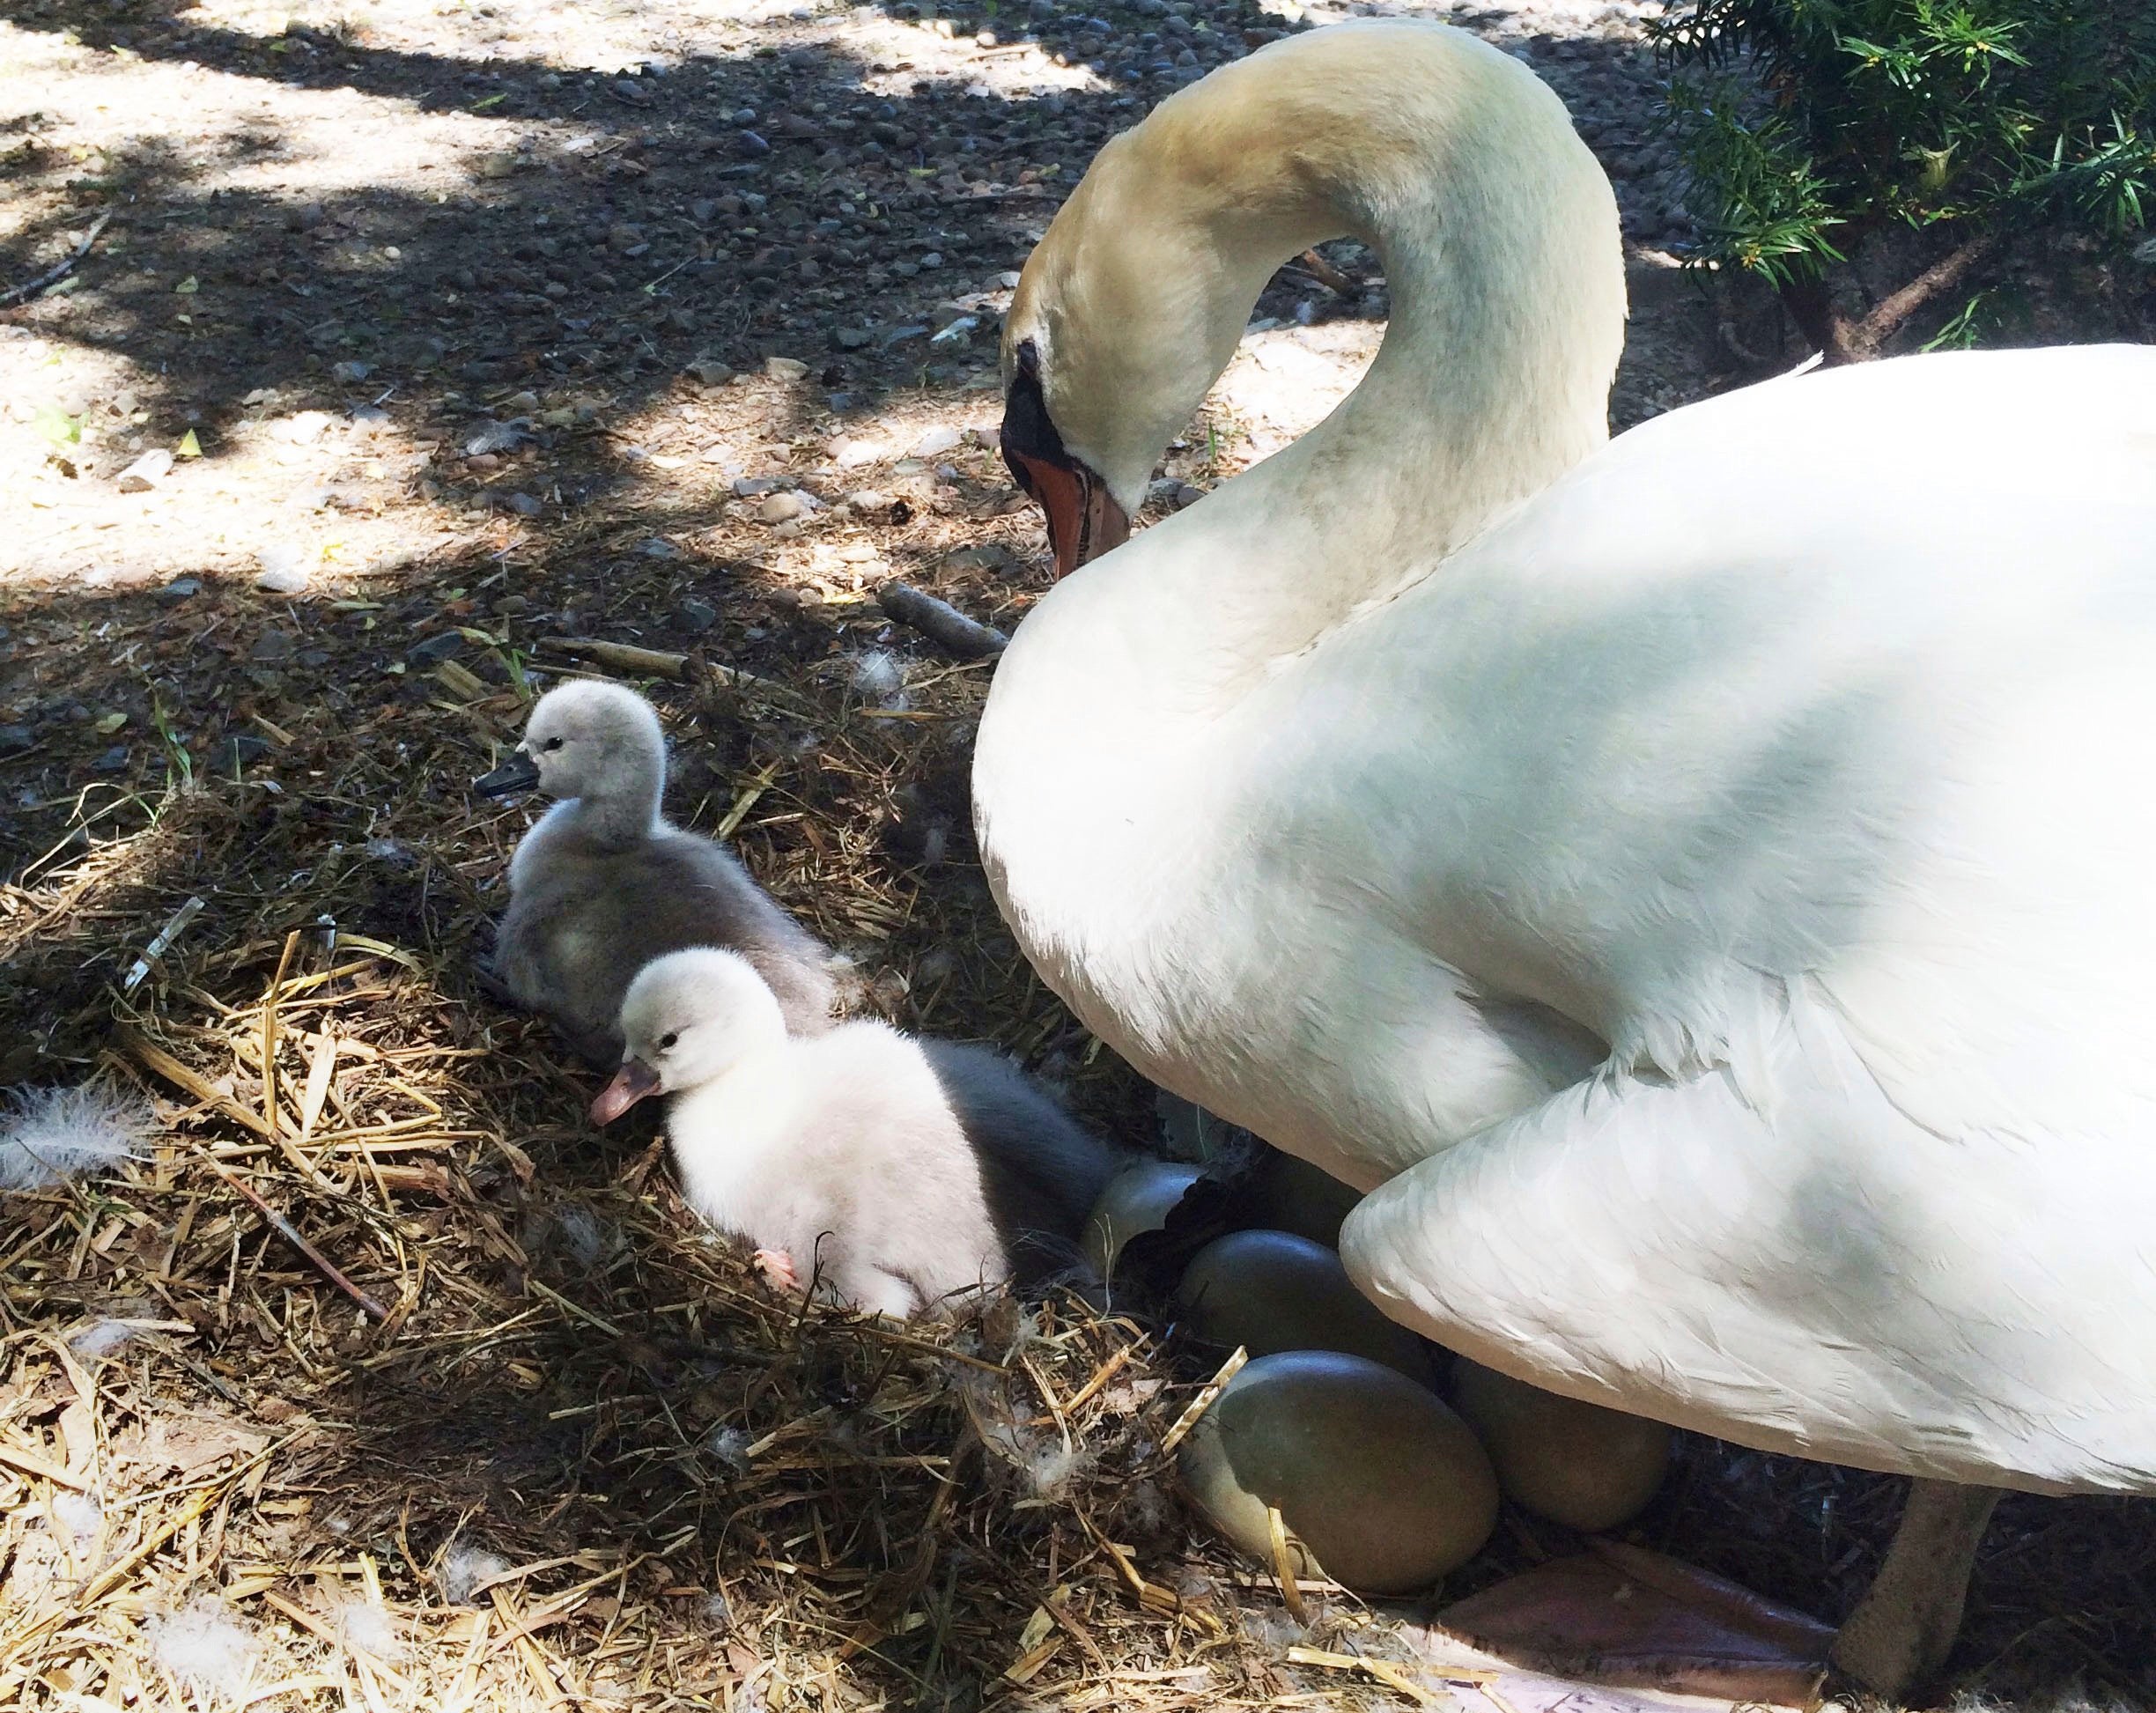 In this June 2014 photo, Faye tends to two baby cygnets at the Manlius Swan Pond in Manlius, New York.